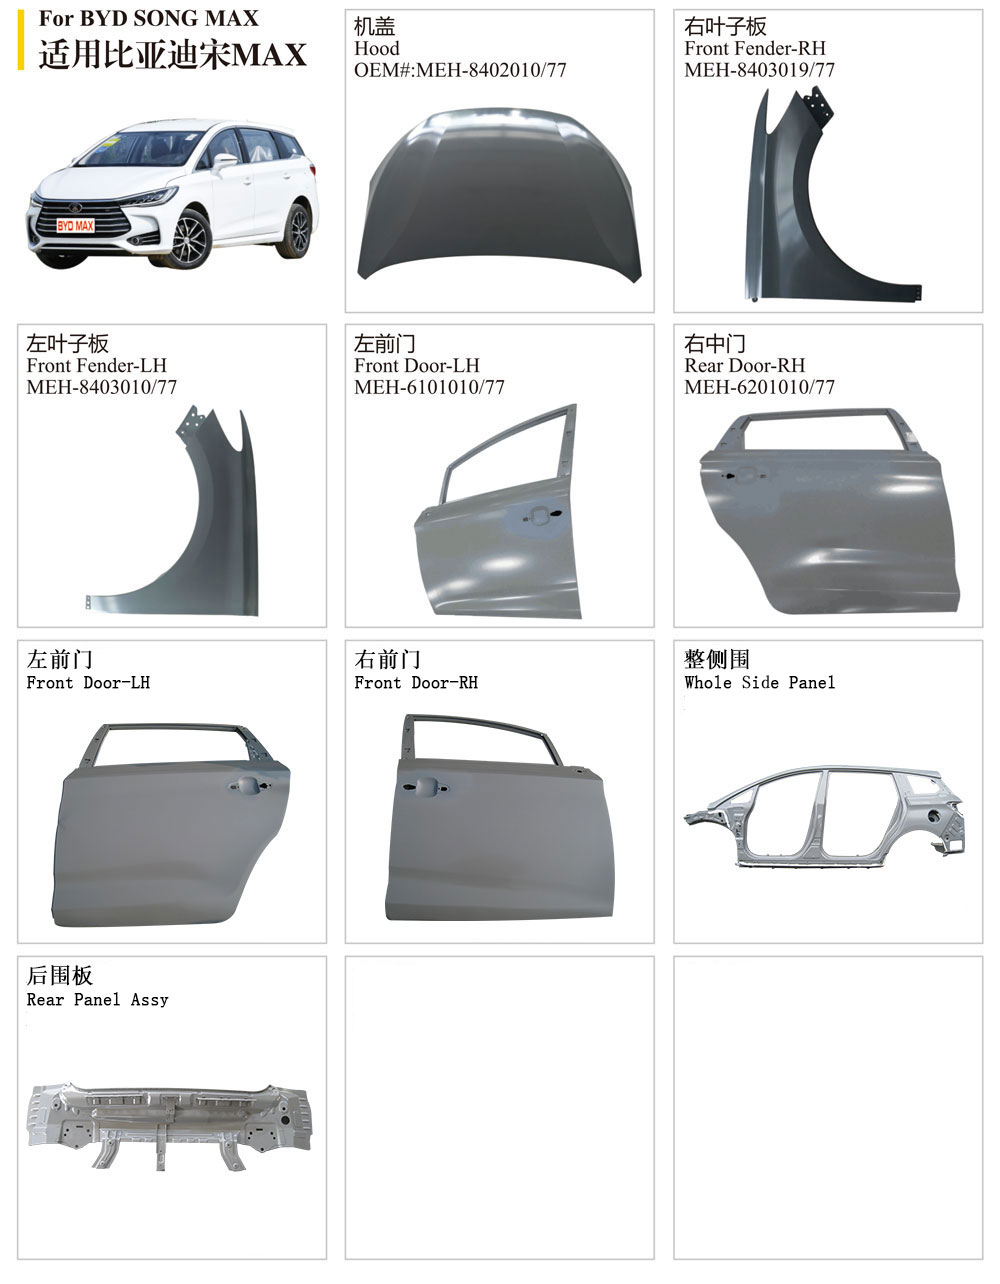 Byd Song Max Rear Panel Assy